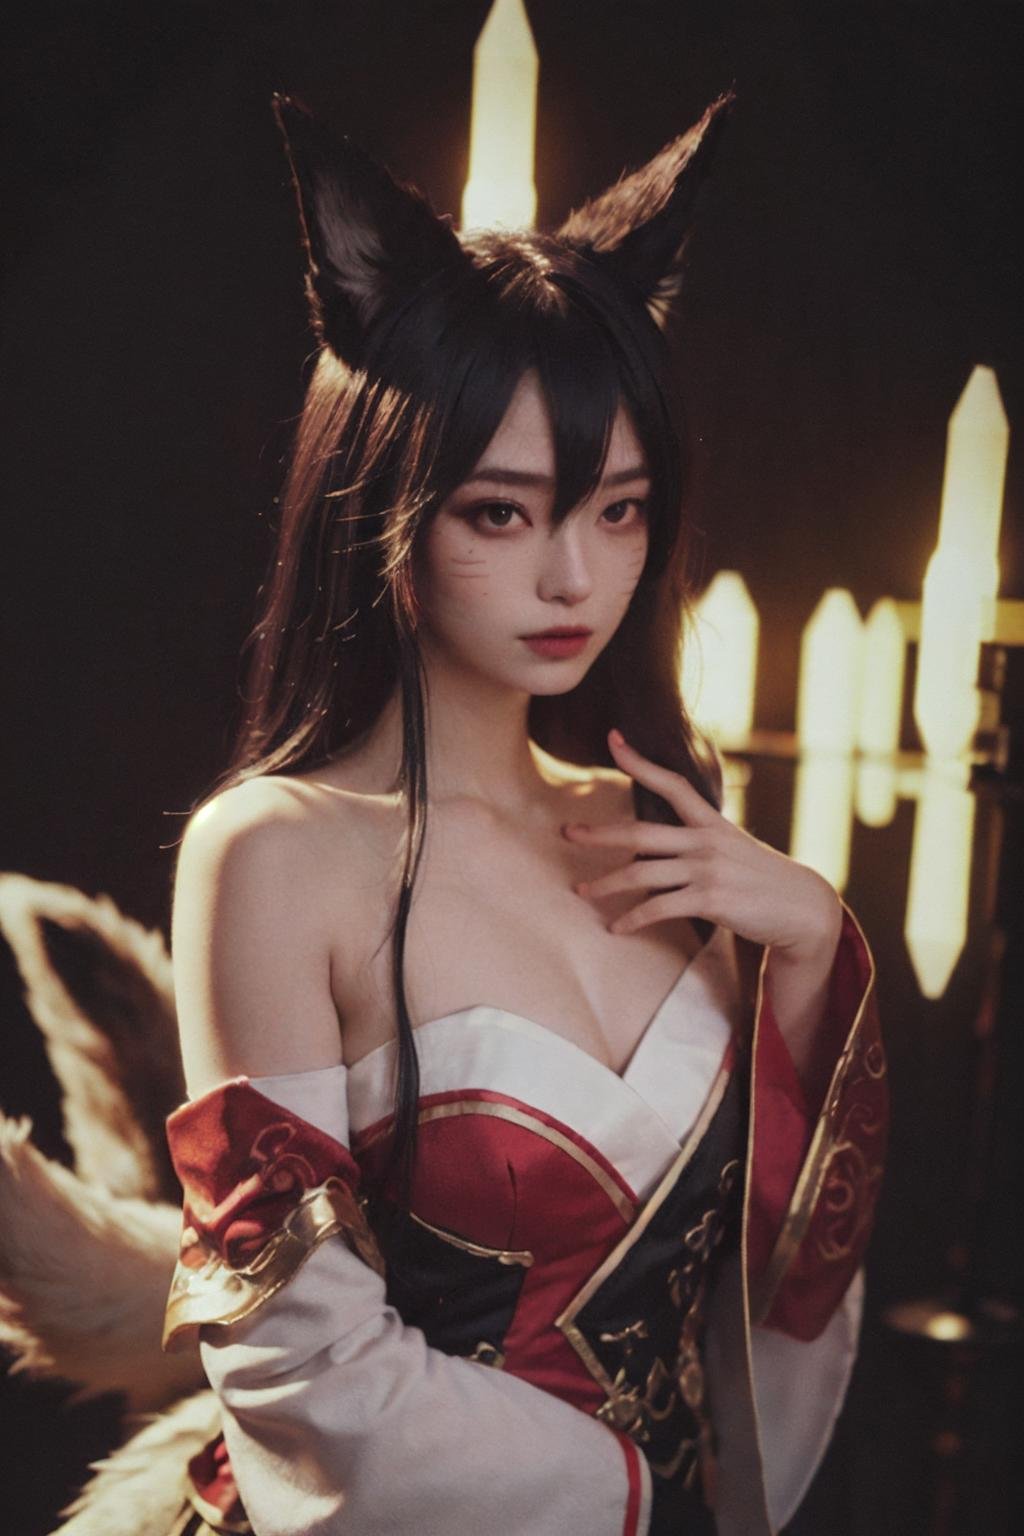 Best quality, masterpiece, ultra high res, (photorealistic:1.4), raw photo, 1girl, offshoulder, in the dark, deep shadow, low key, cold light, AHRI_COSPLAY, WHITE TAILS, BLACK LONG HAIR, YELLOW EYES <lora:FilmG2:0.5:1,0,0,0,0,0,0,0,0,0,0,0.8,1,1,1,1,1> <lora:ahri_Cosplay_V1:1:1,1,1,1,1,0,0,0,1,1,1,1,1,1,1,0,0>,fix,good hands,<lora:Polaroid Type_600_B_1.1:1>,<lora:add_detail:0.3:1,0,1,1,0.2,0,0,0,0,0,0,0,0,0,0,0,0>,